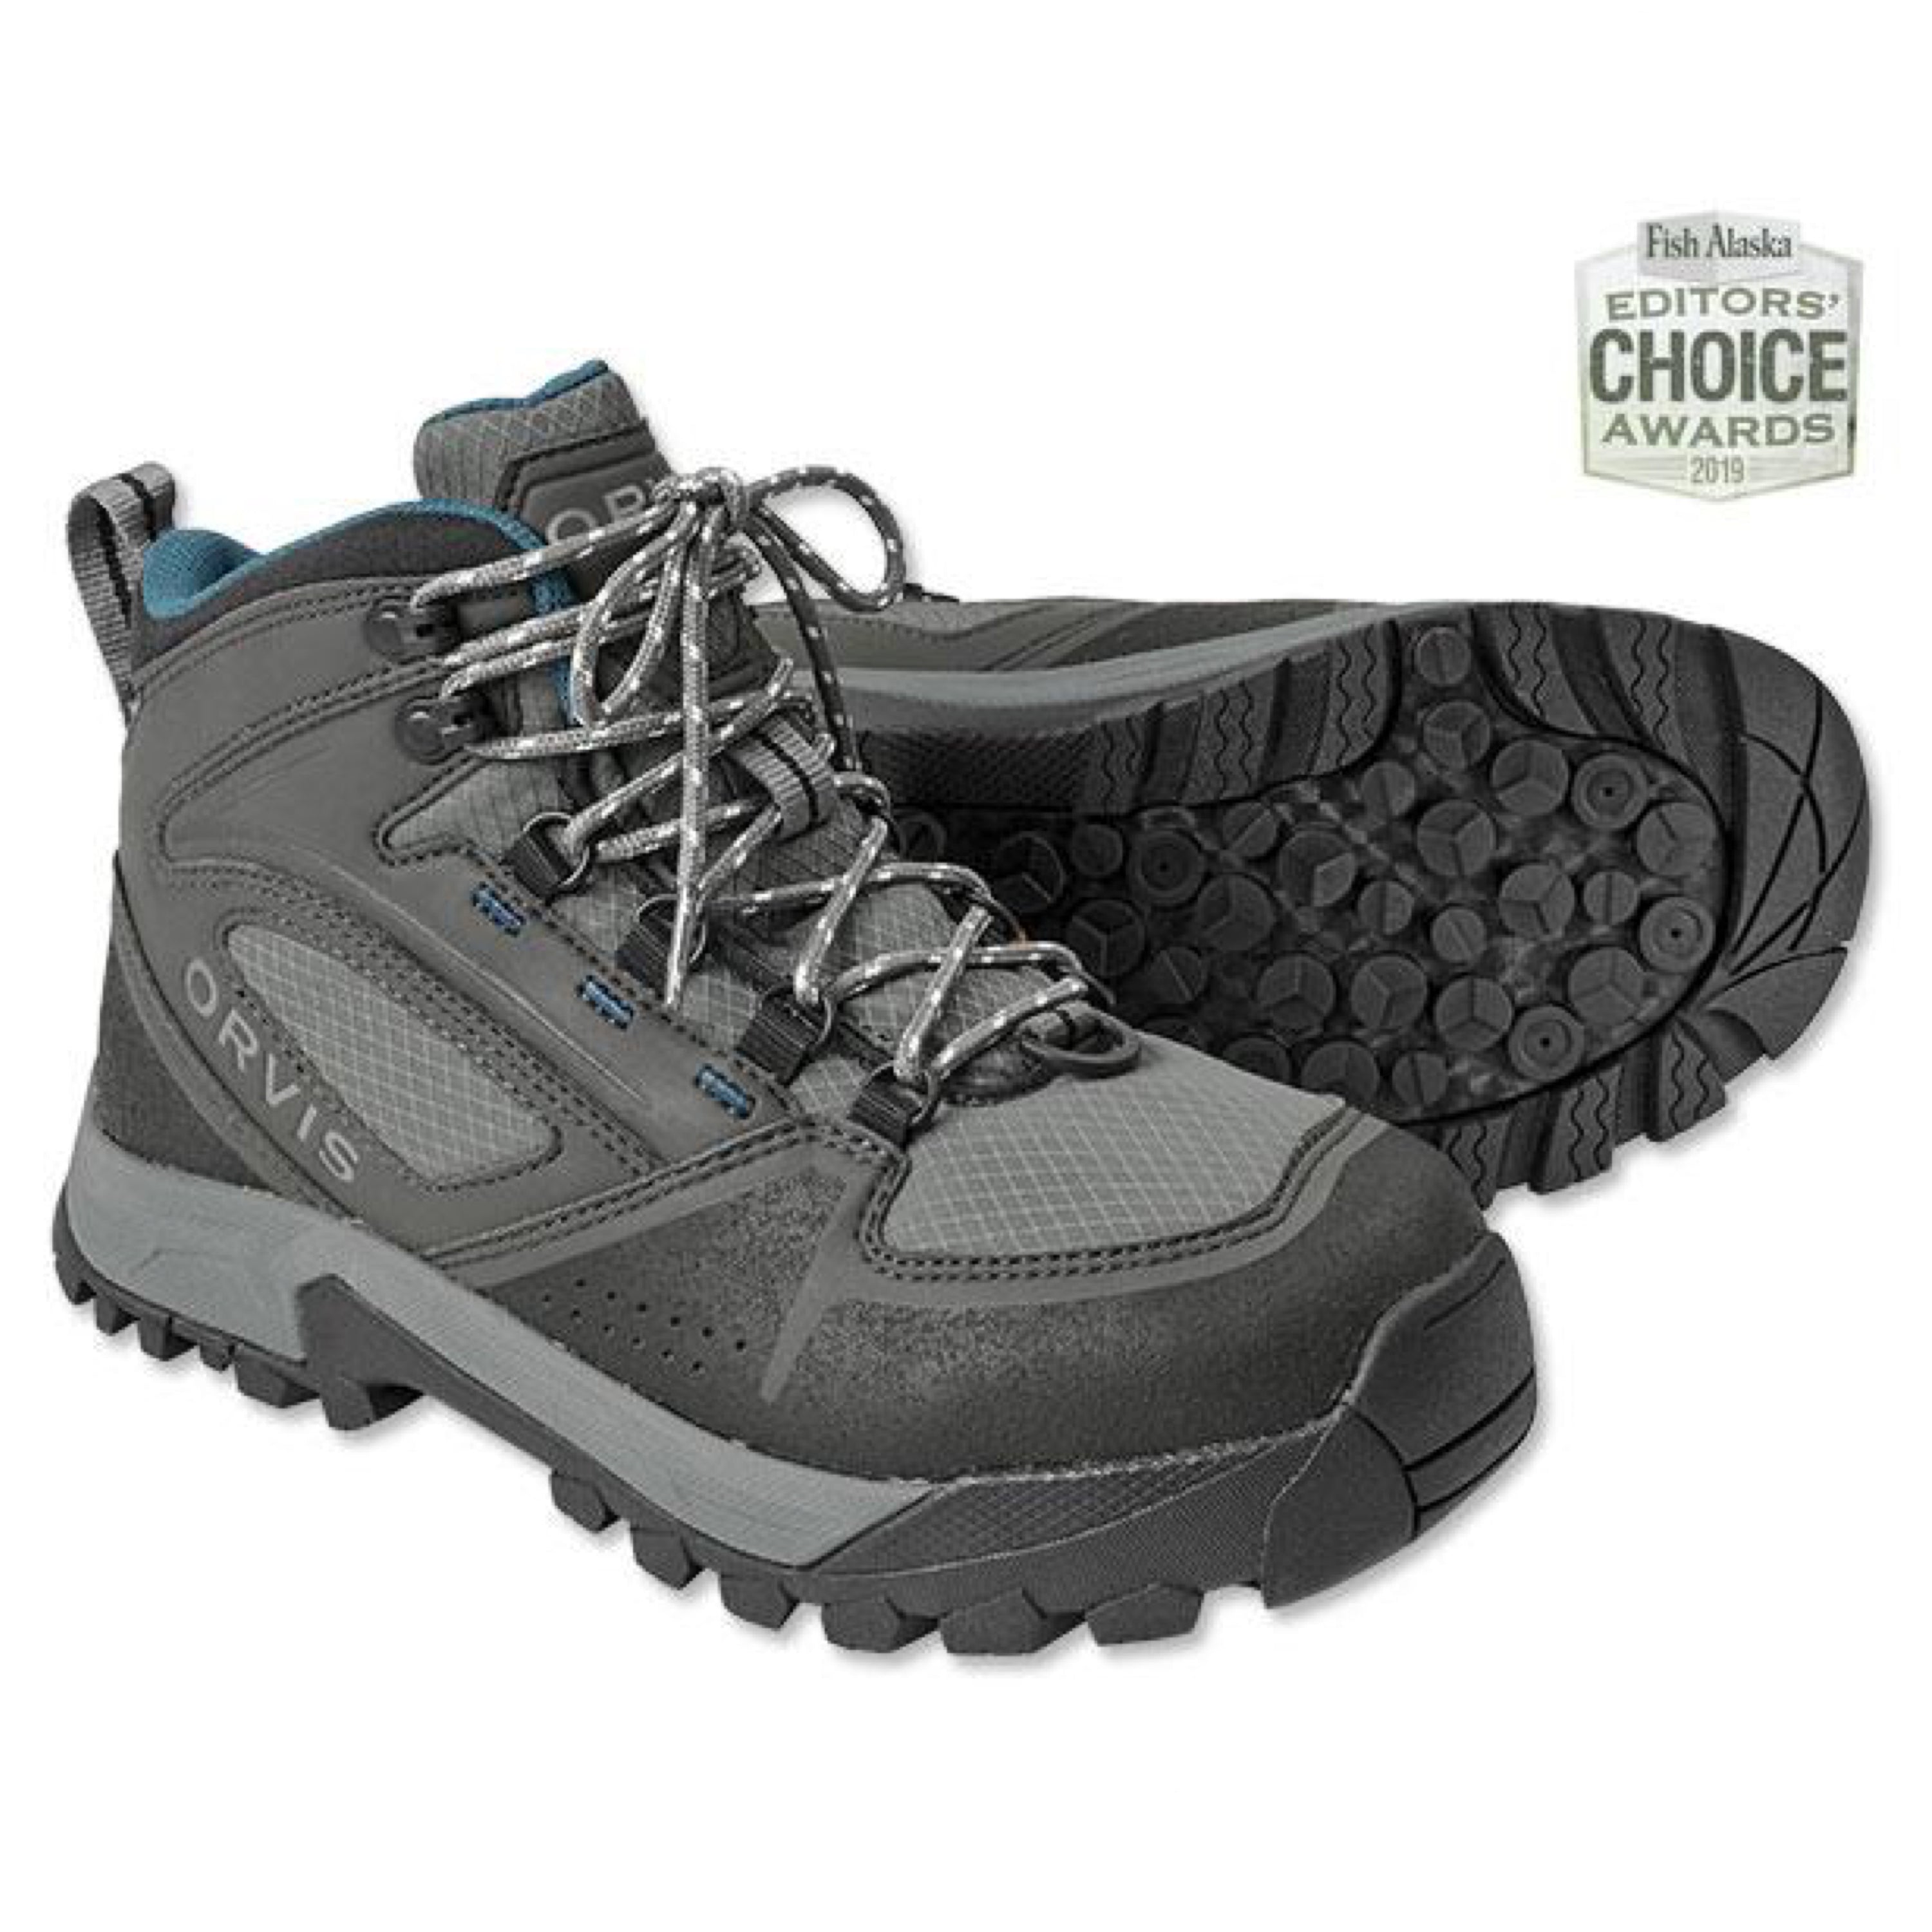 Orvis Men's Pro Approach Wet Wading Shoes